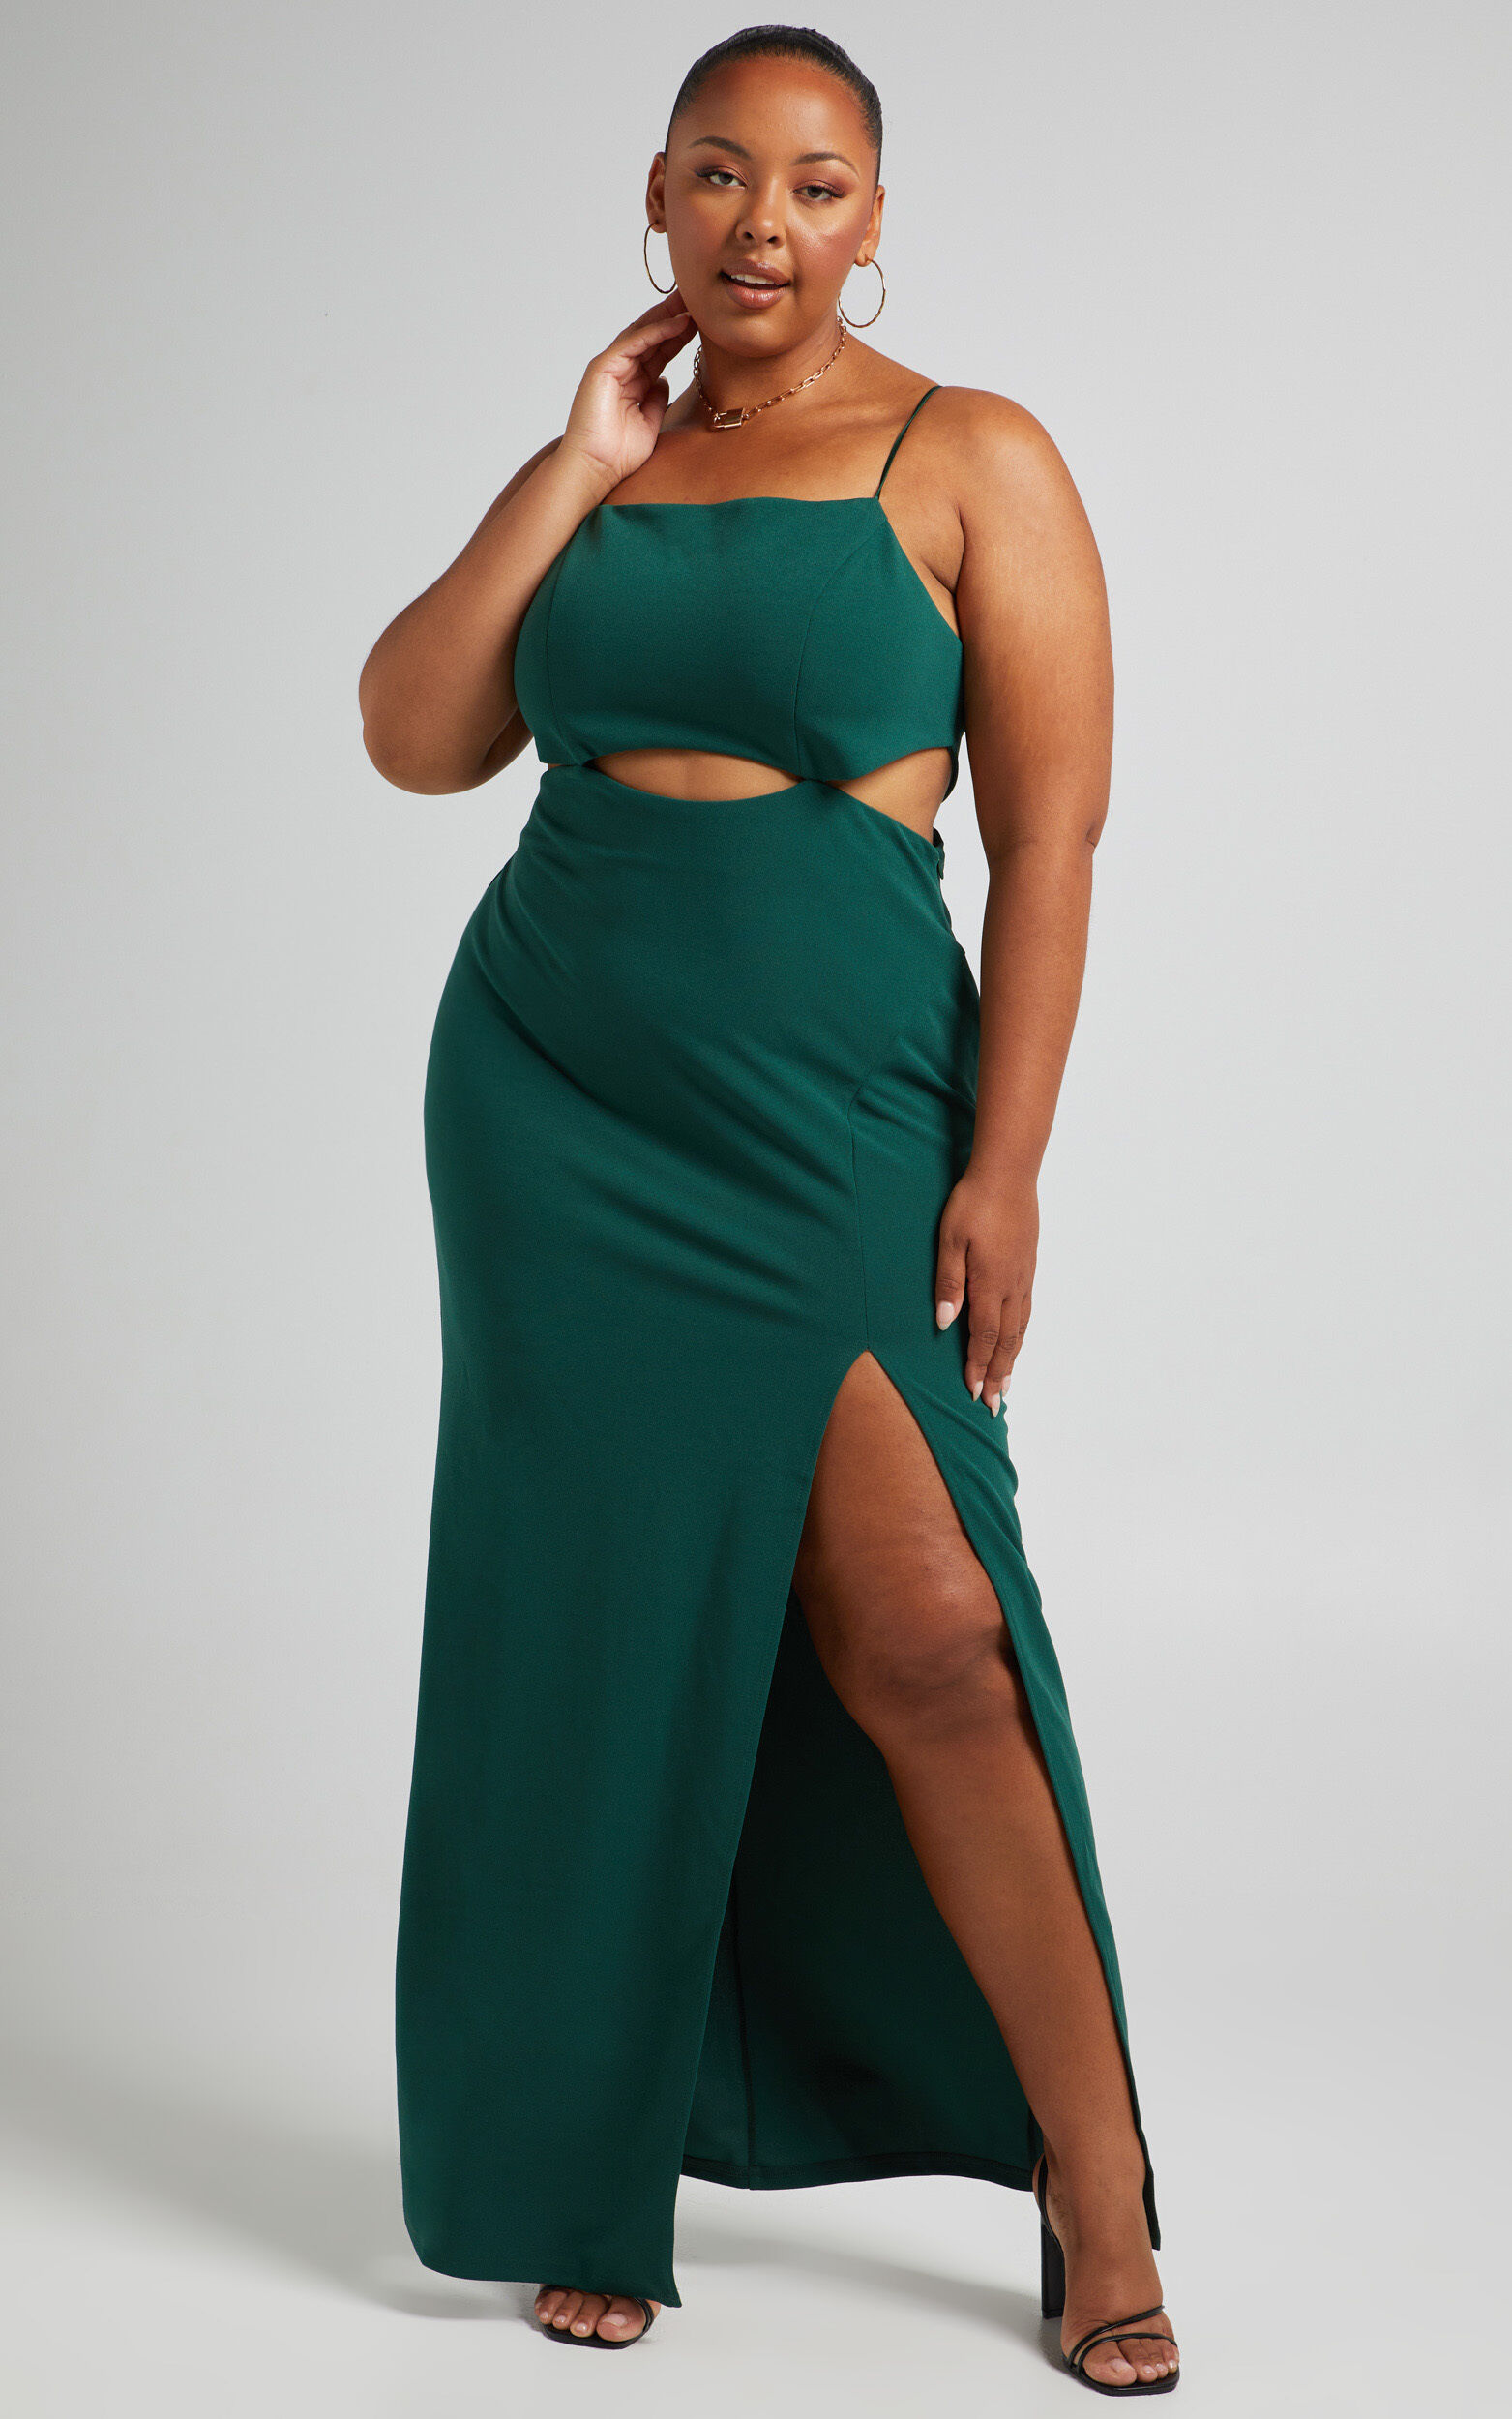 Monet Cut Out Underbust Dress in Emerald - 04, GRN2, super-hi-res image number null